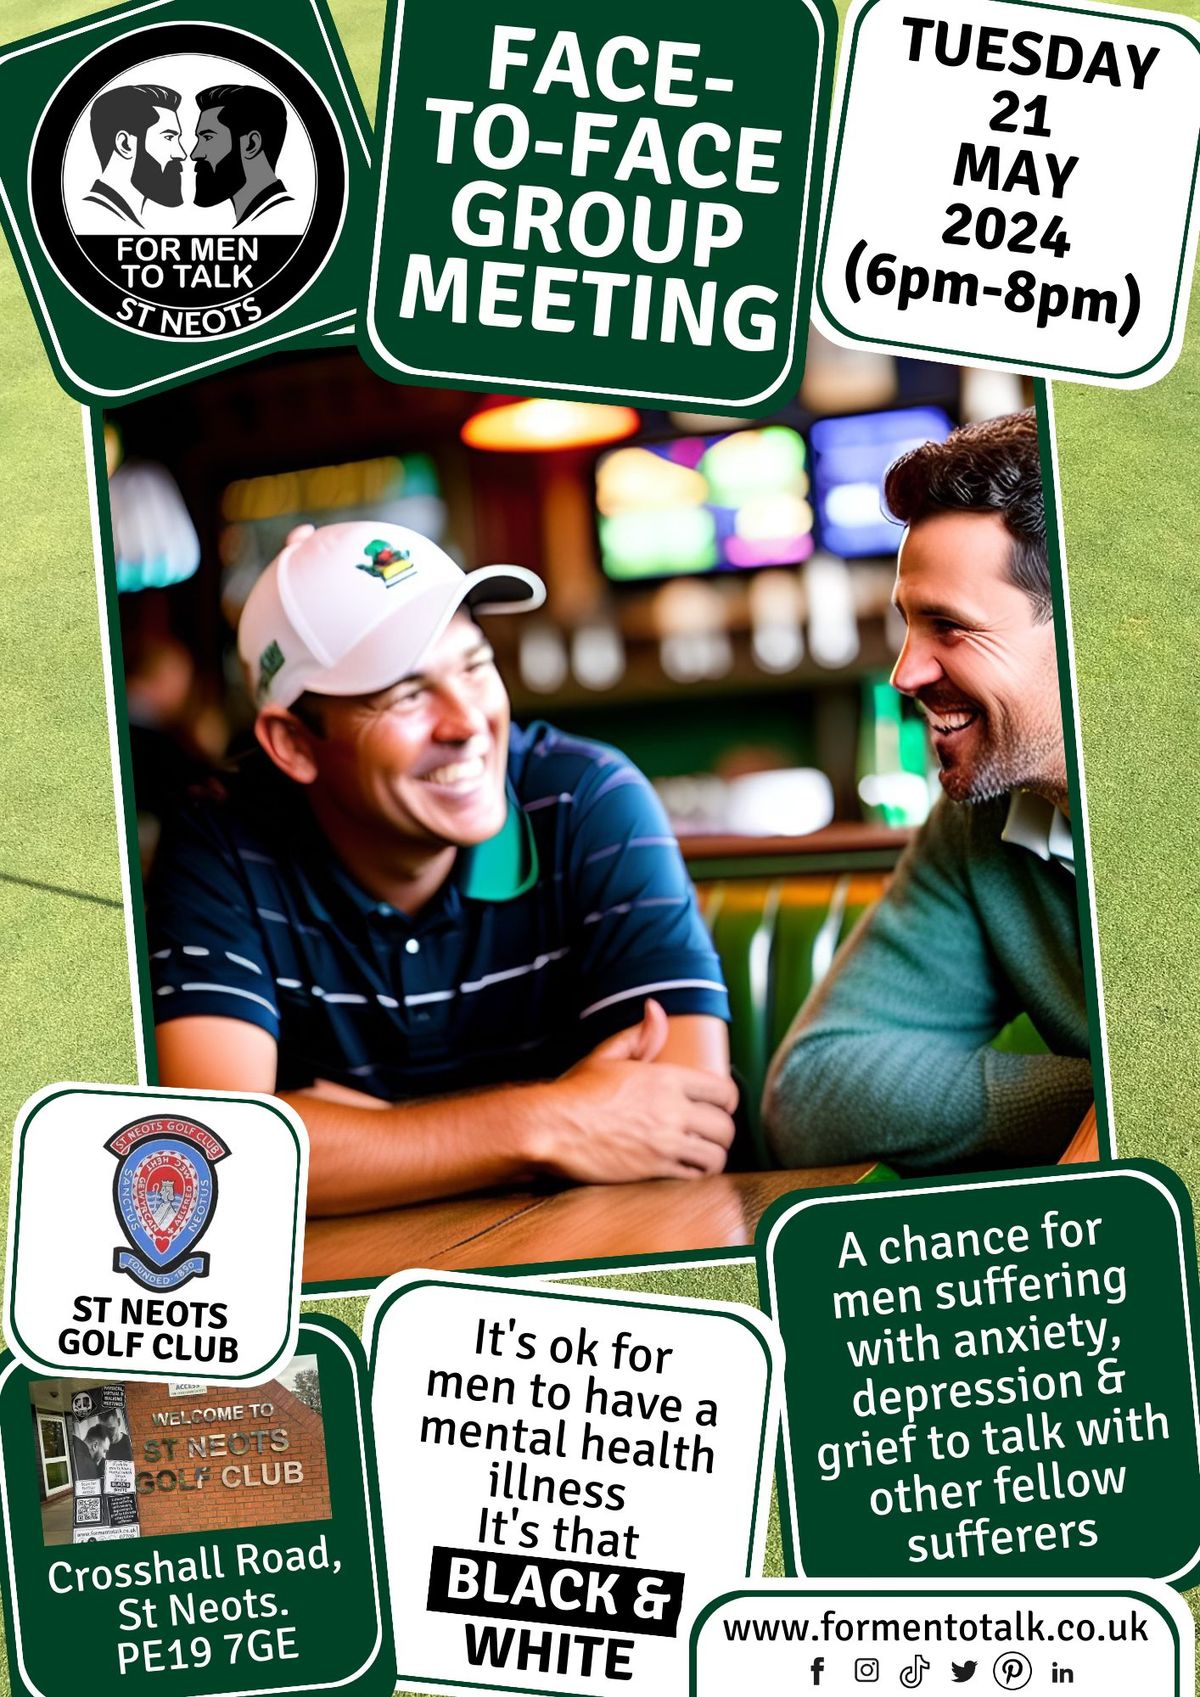 'For Men To Talk' Face-To-Face Group Meeting (St. Neots)